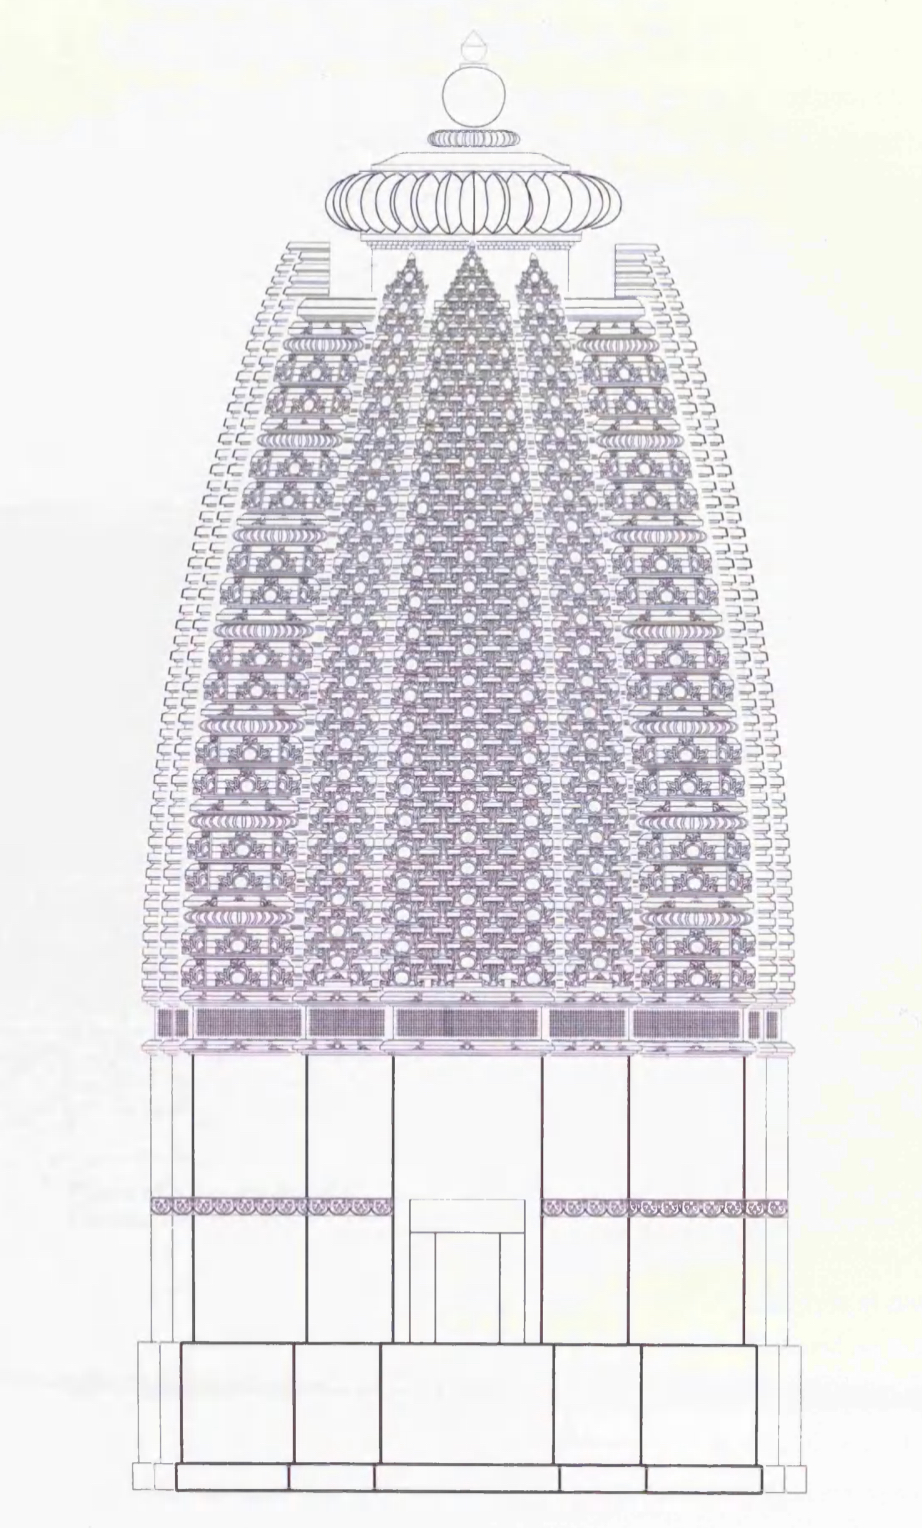 Hypothetical Elevation of Temple 45 at Sanchi